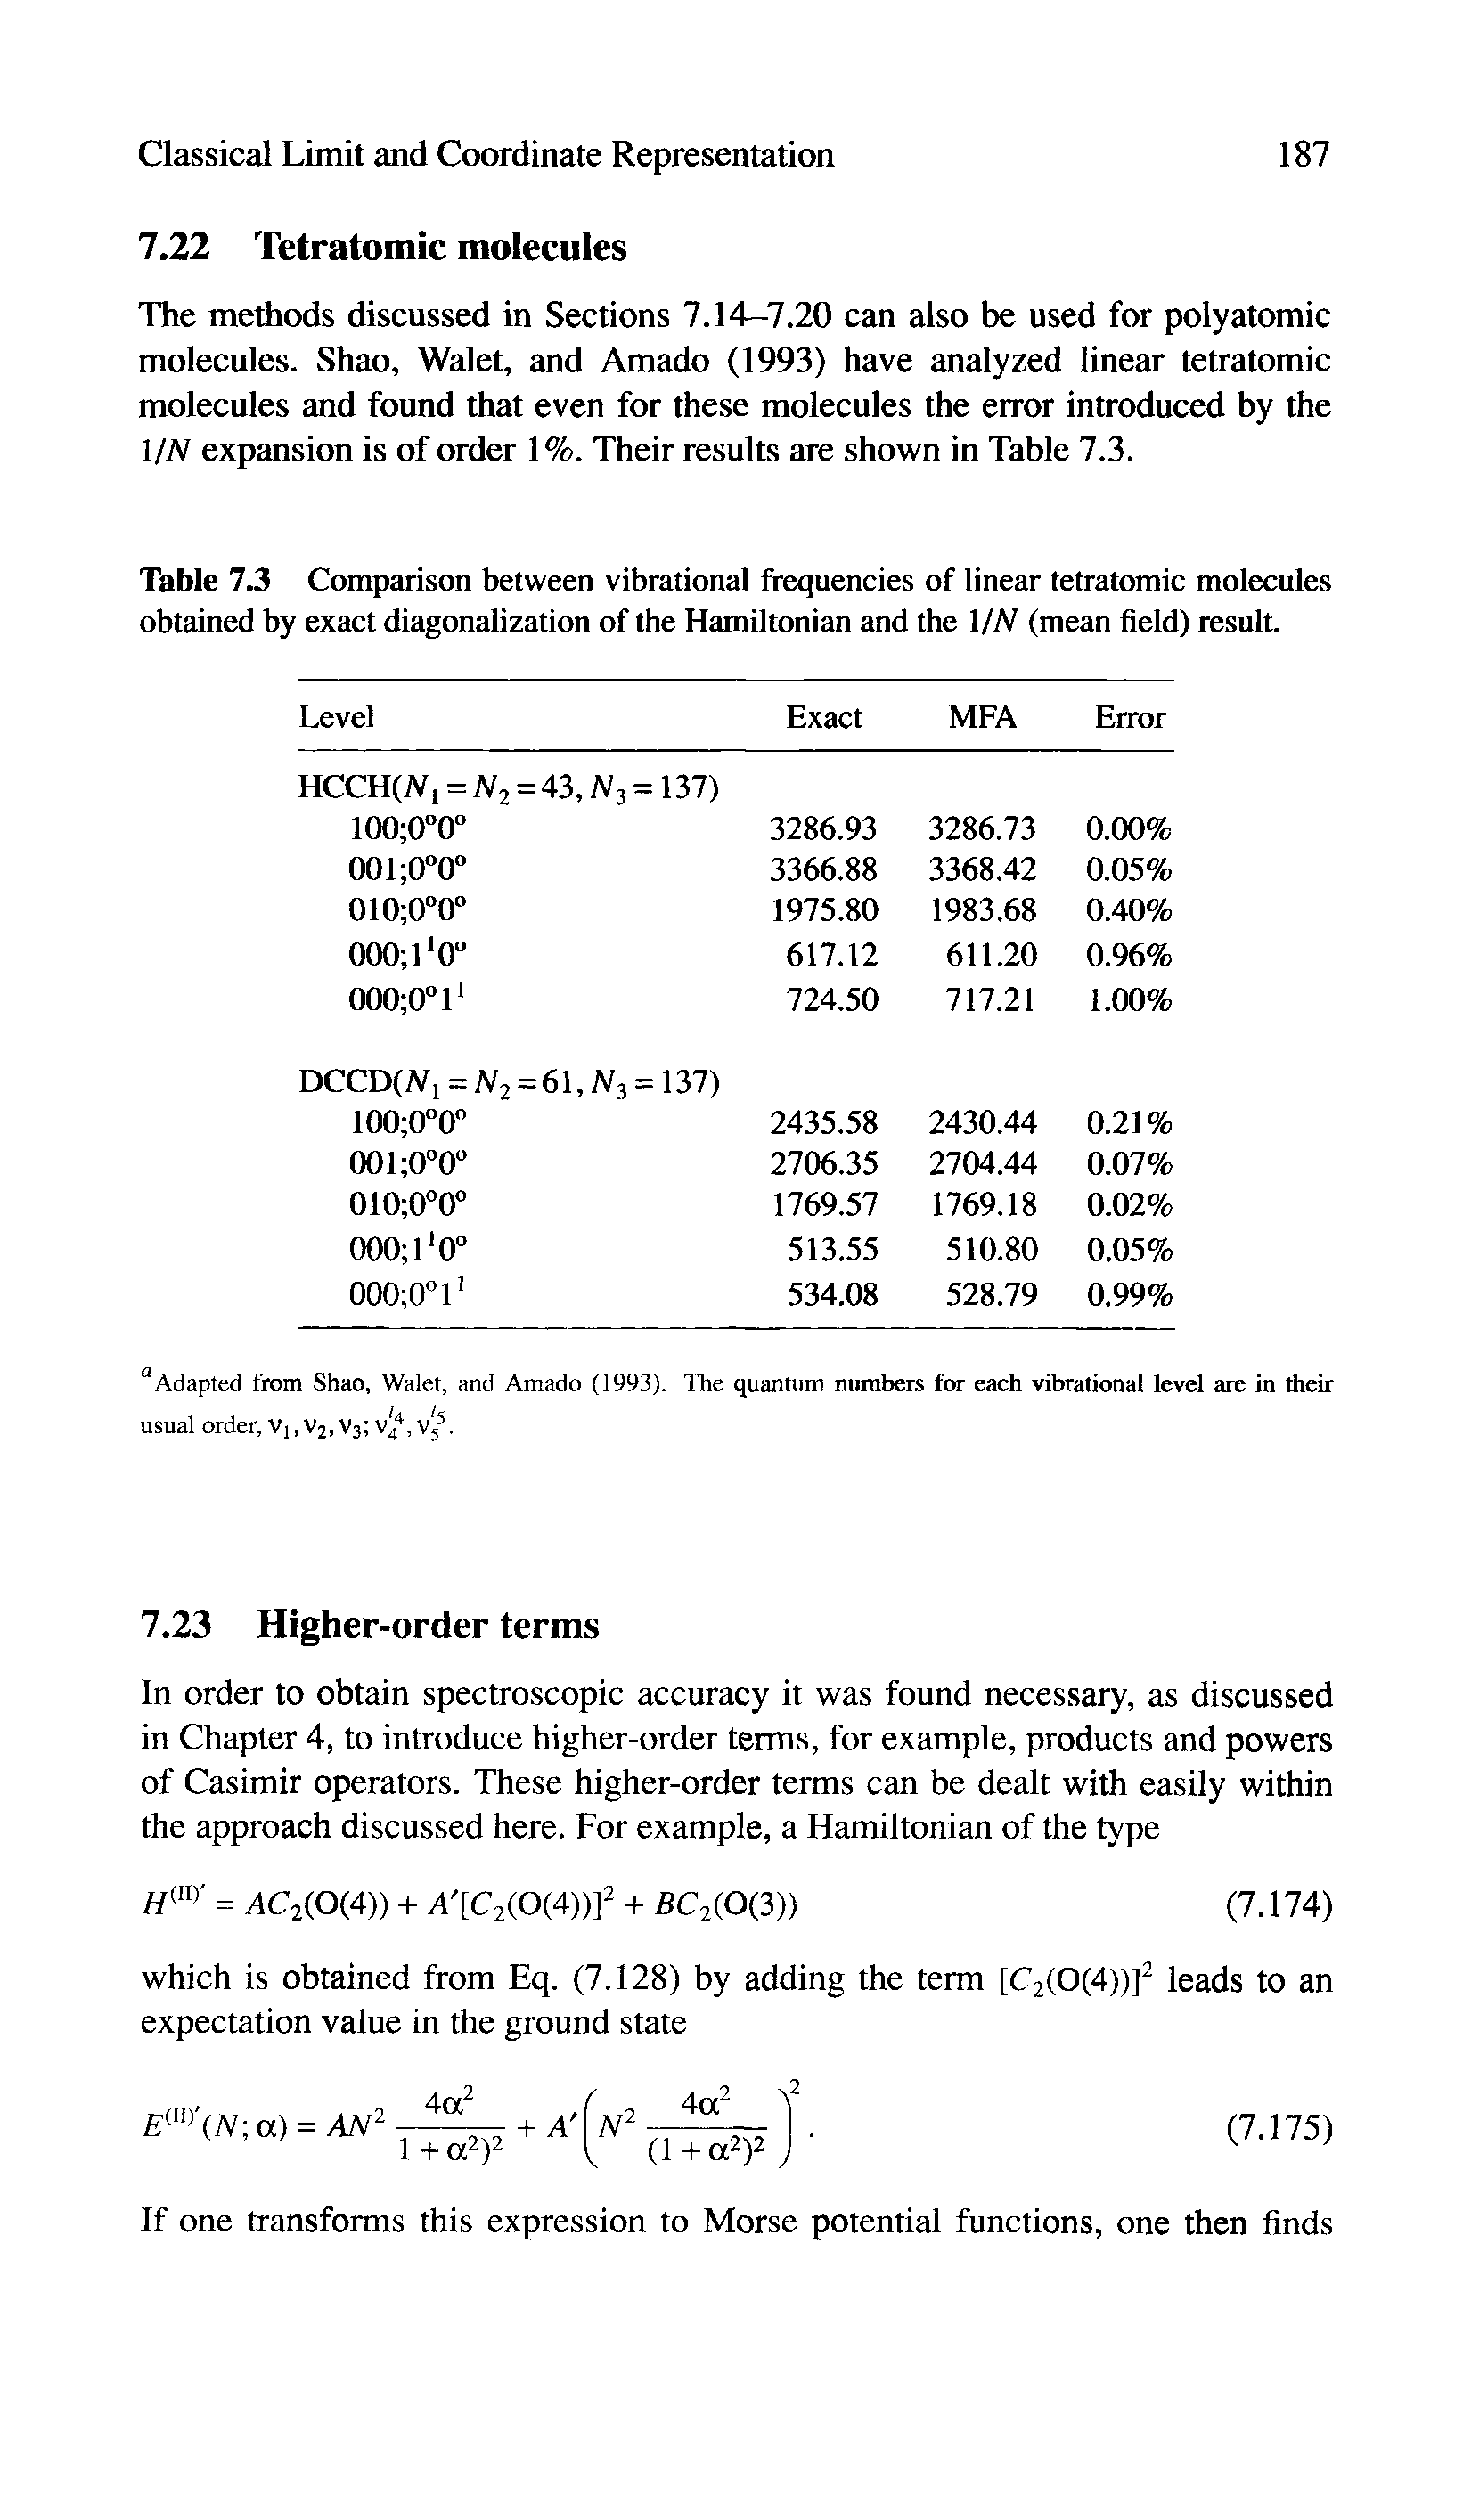 Table 7.3 Comparison between vibrational frequencies of linear tetratomic molecules obtained by exact diagonalization of the Hamiltonian and the 1 IN (mean field) result.